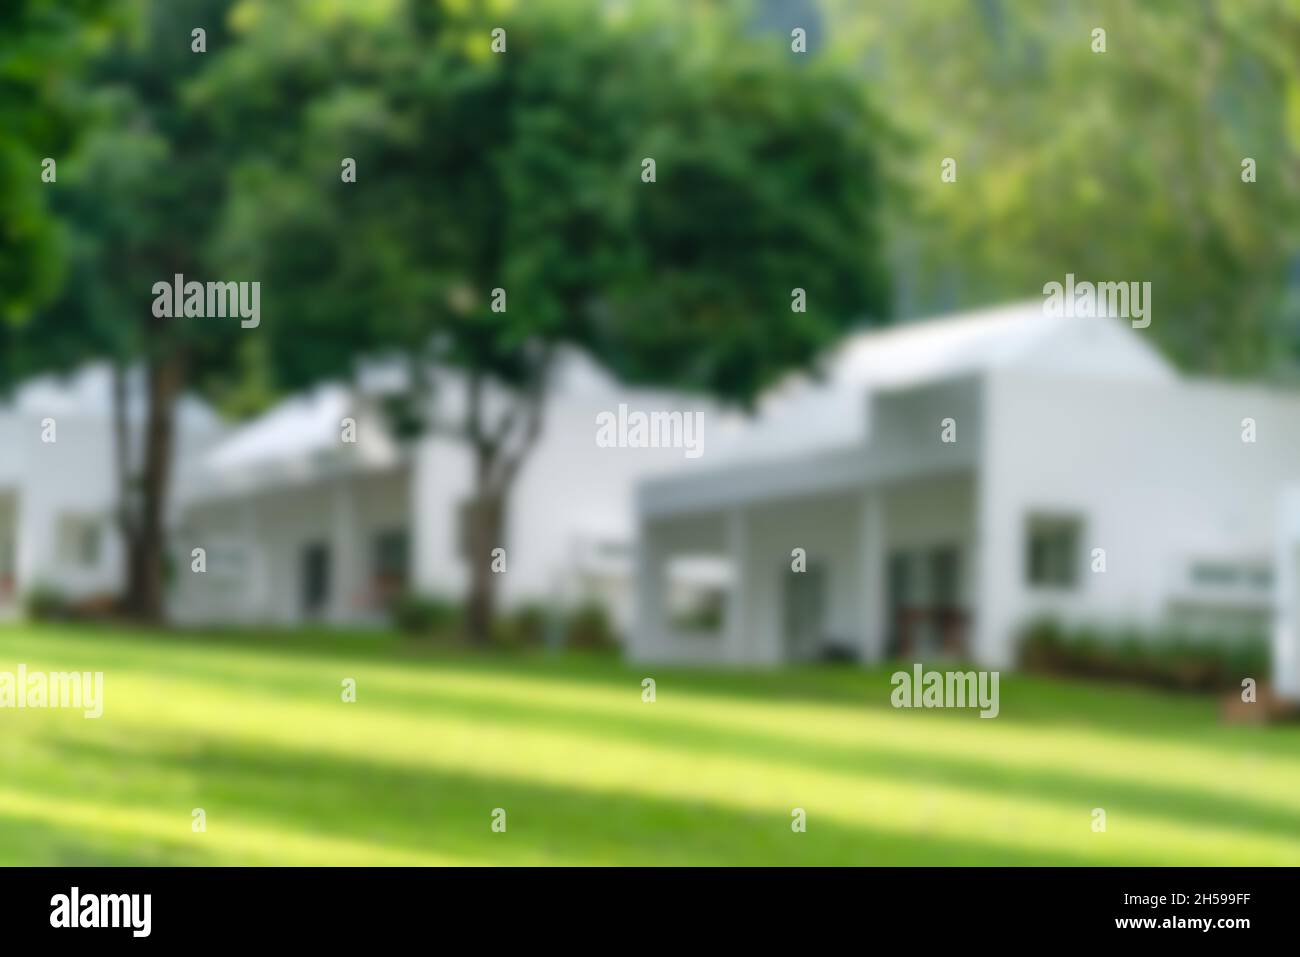 Blurred background of white houses lined up on a grassy hillside. surrounding big trees, The evening sunlight hits the grass. Stock Photo